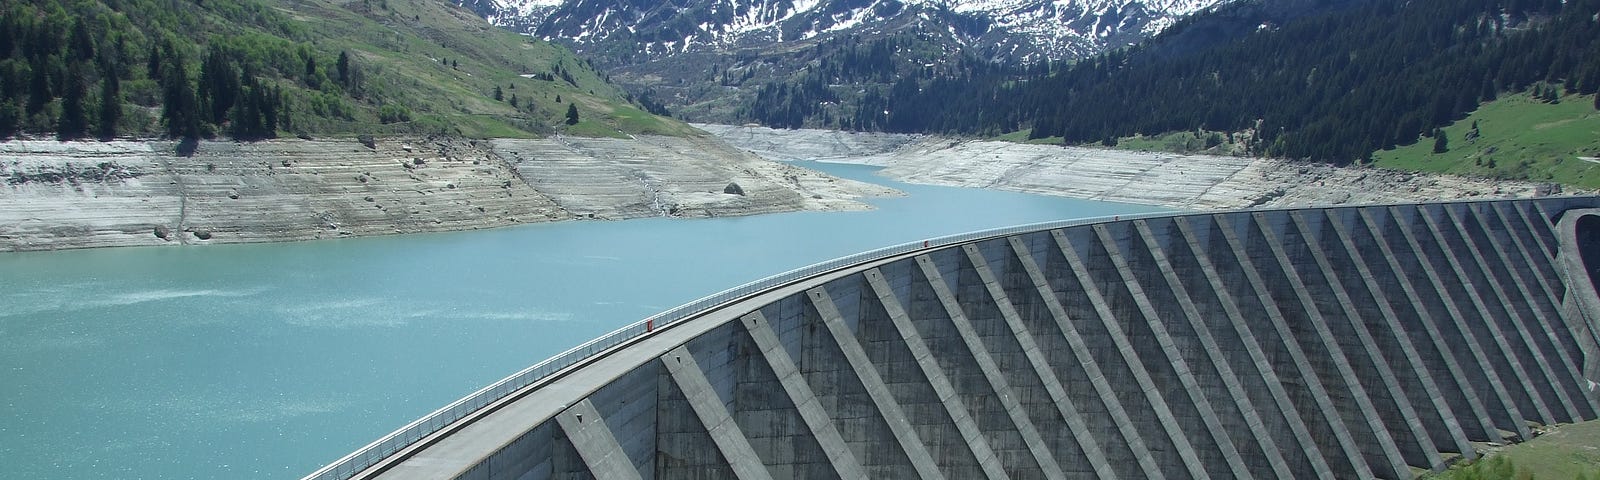 A dam with mountains in the background